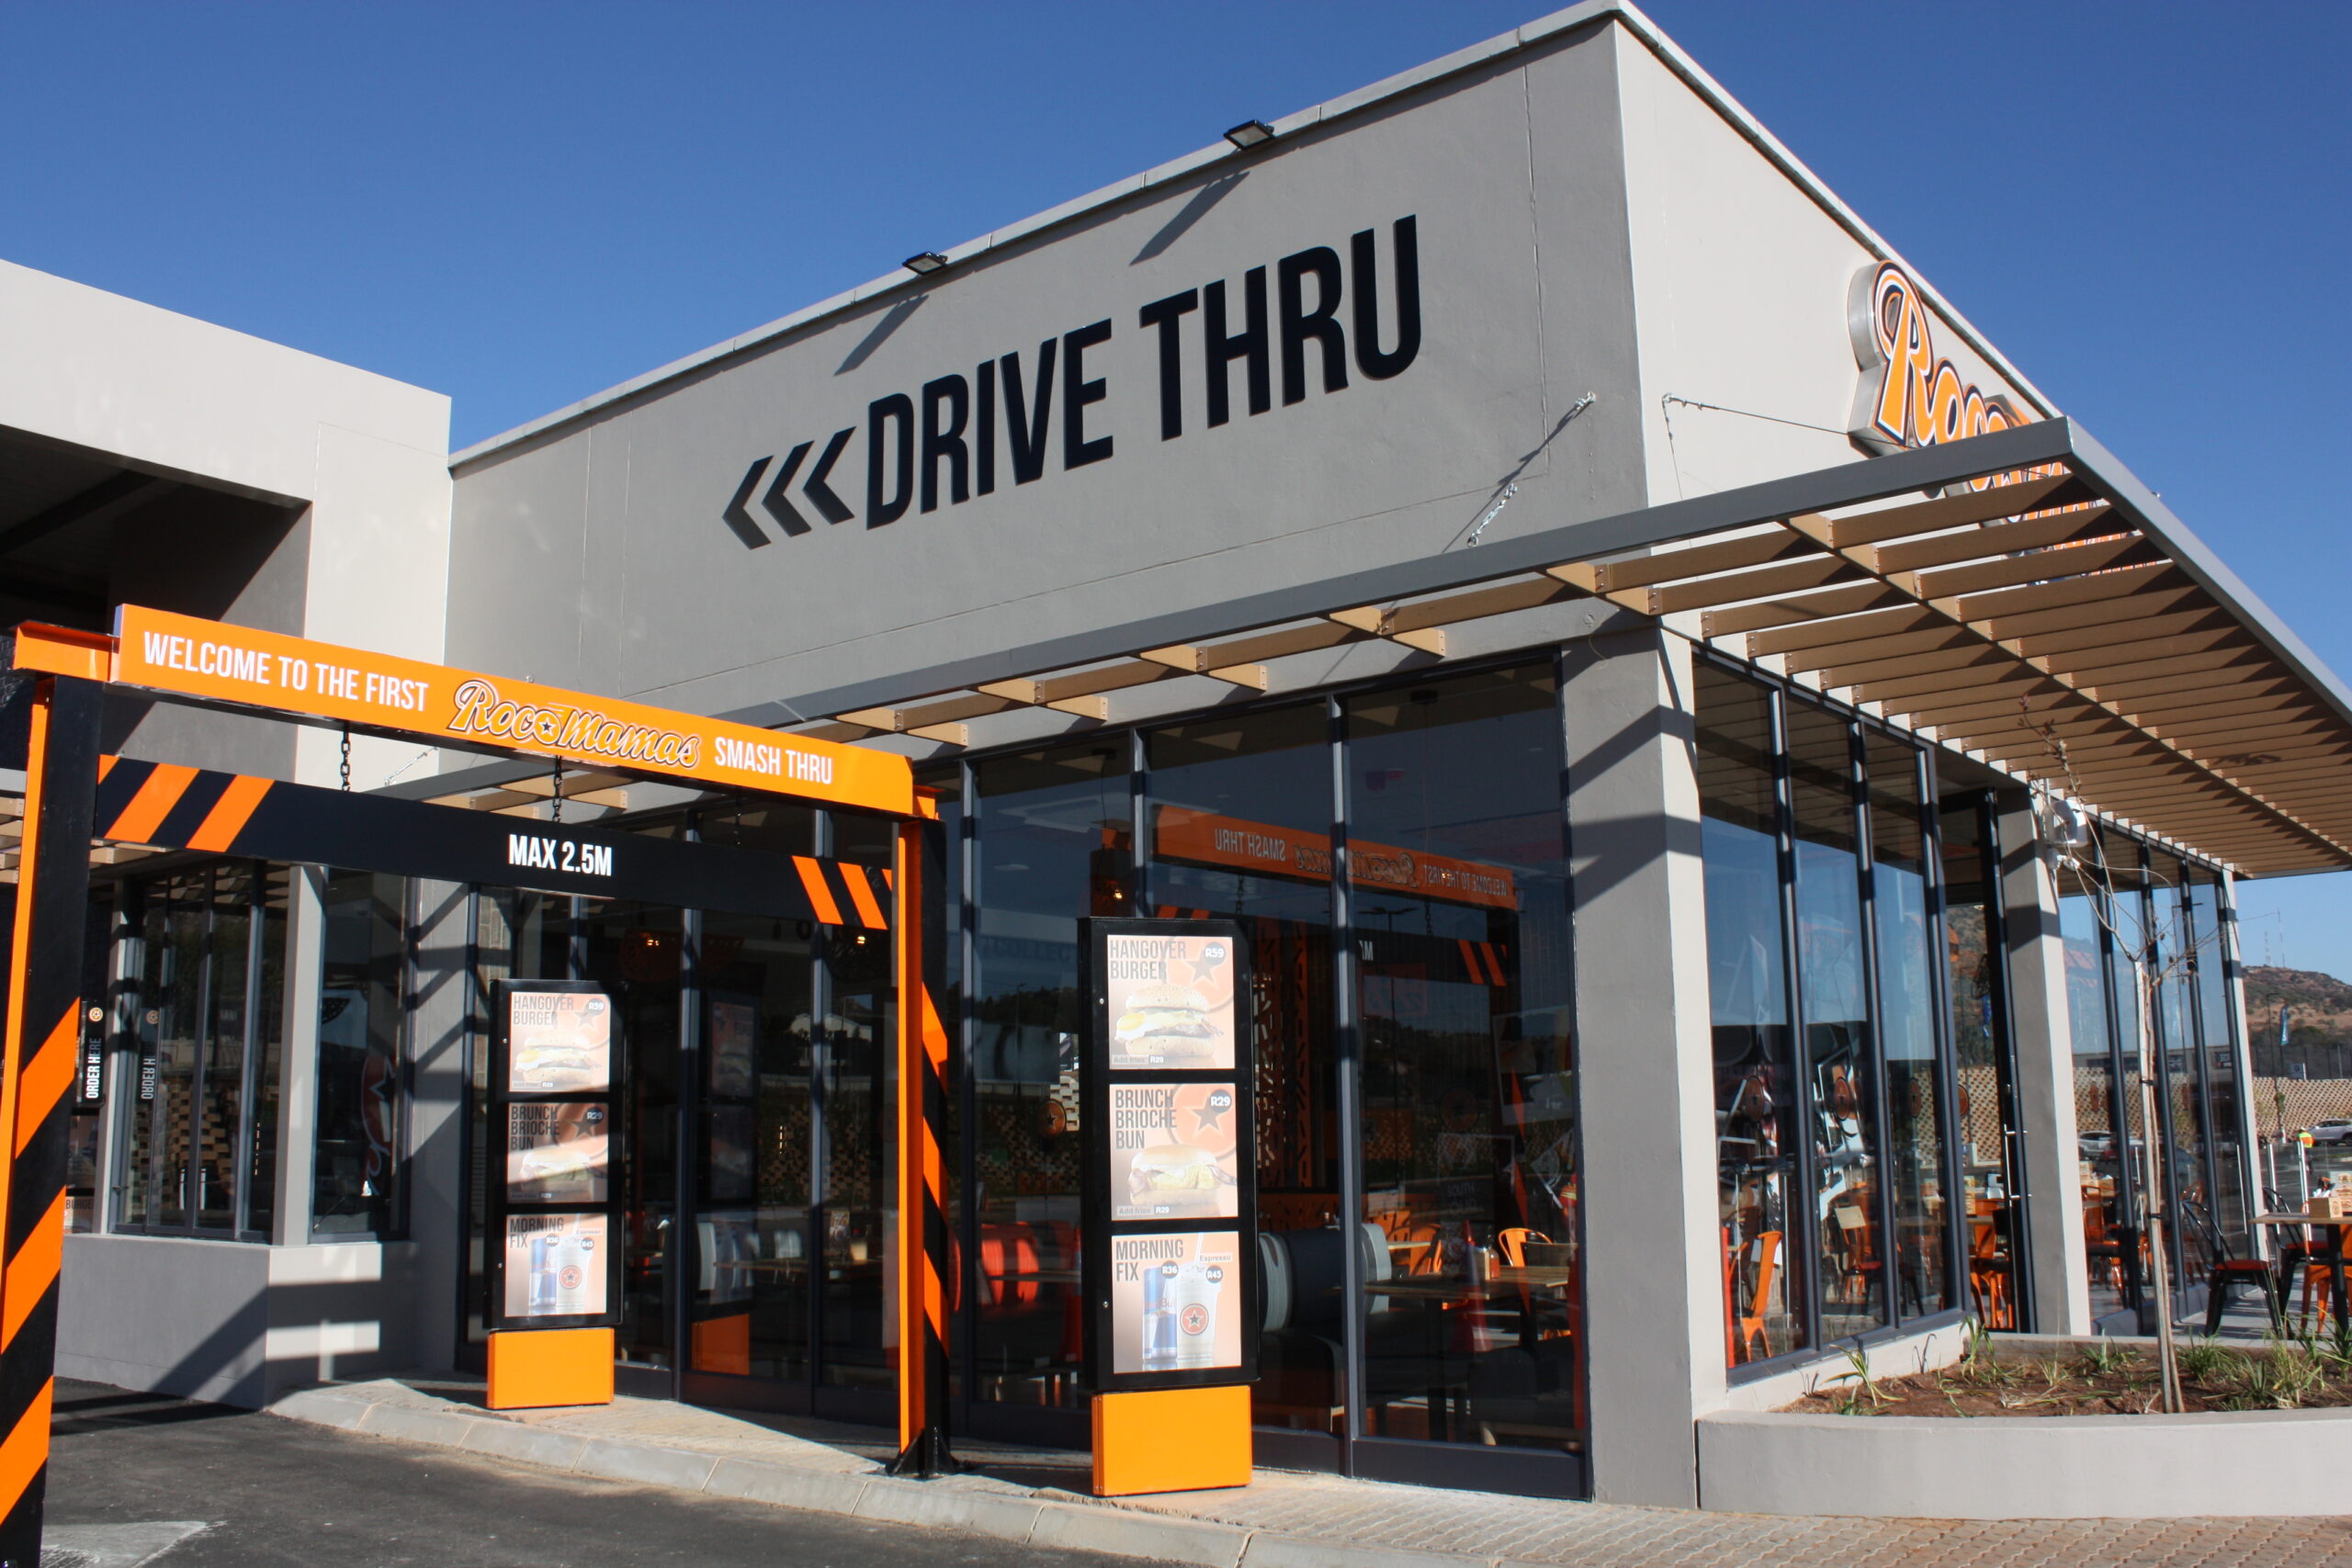 First RocoMamas Drive Thru launched